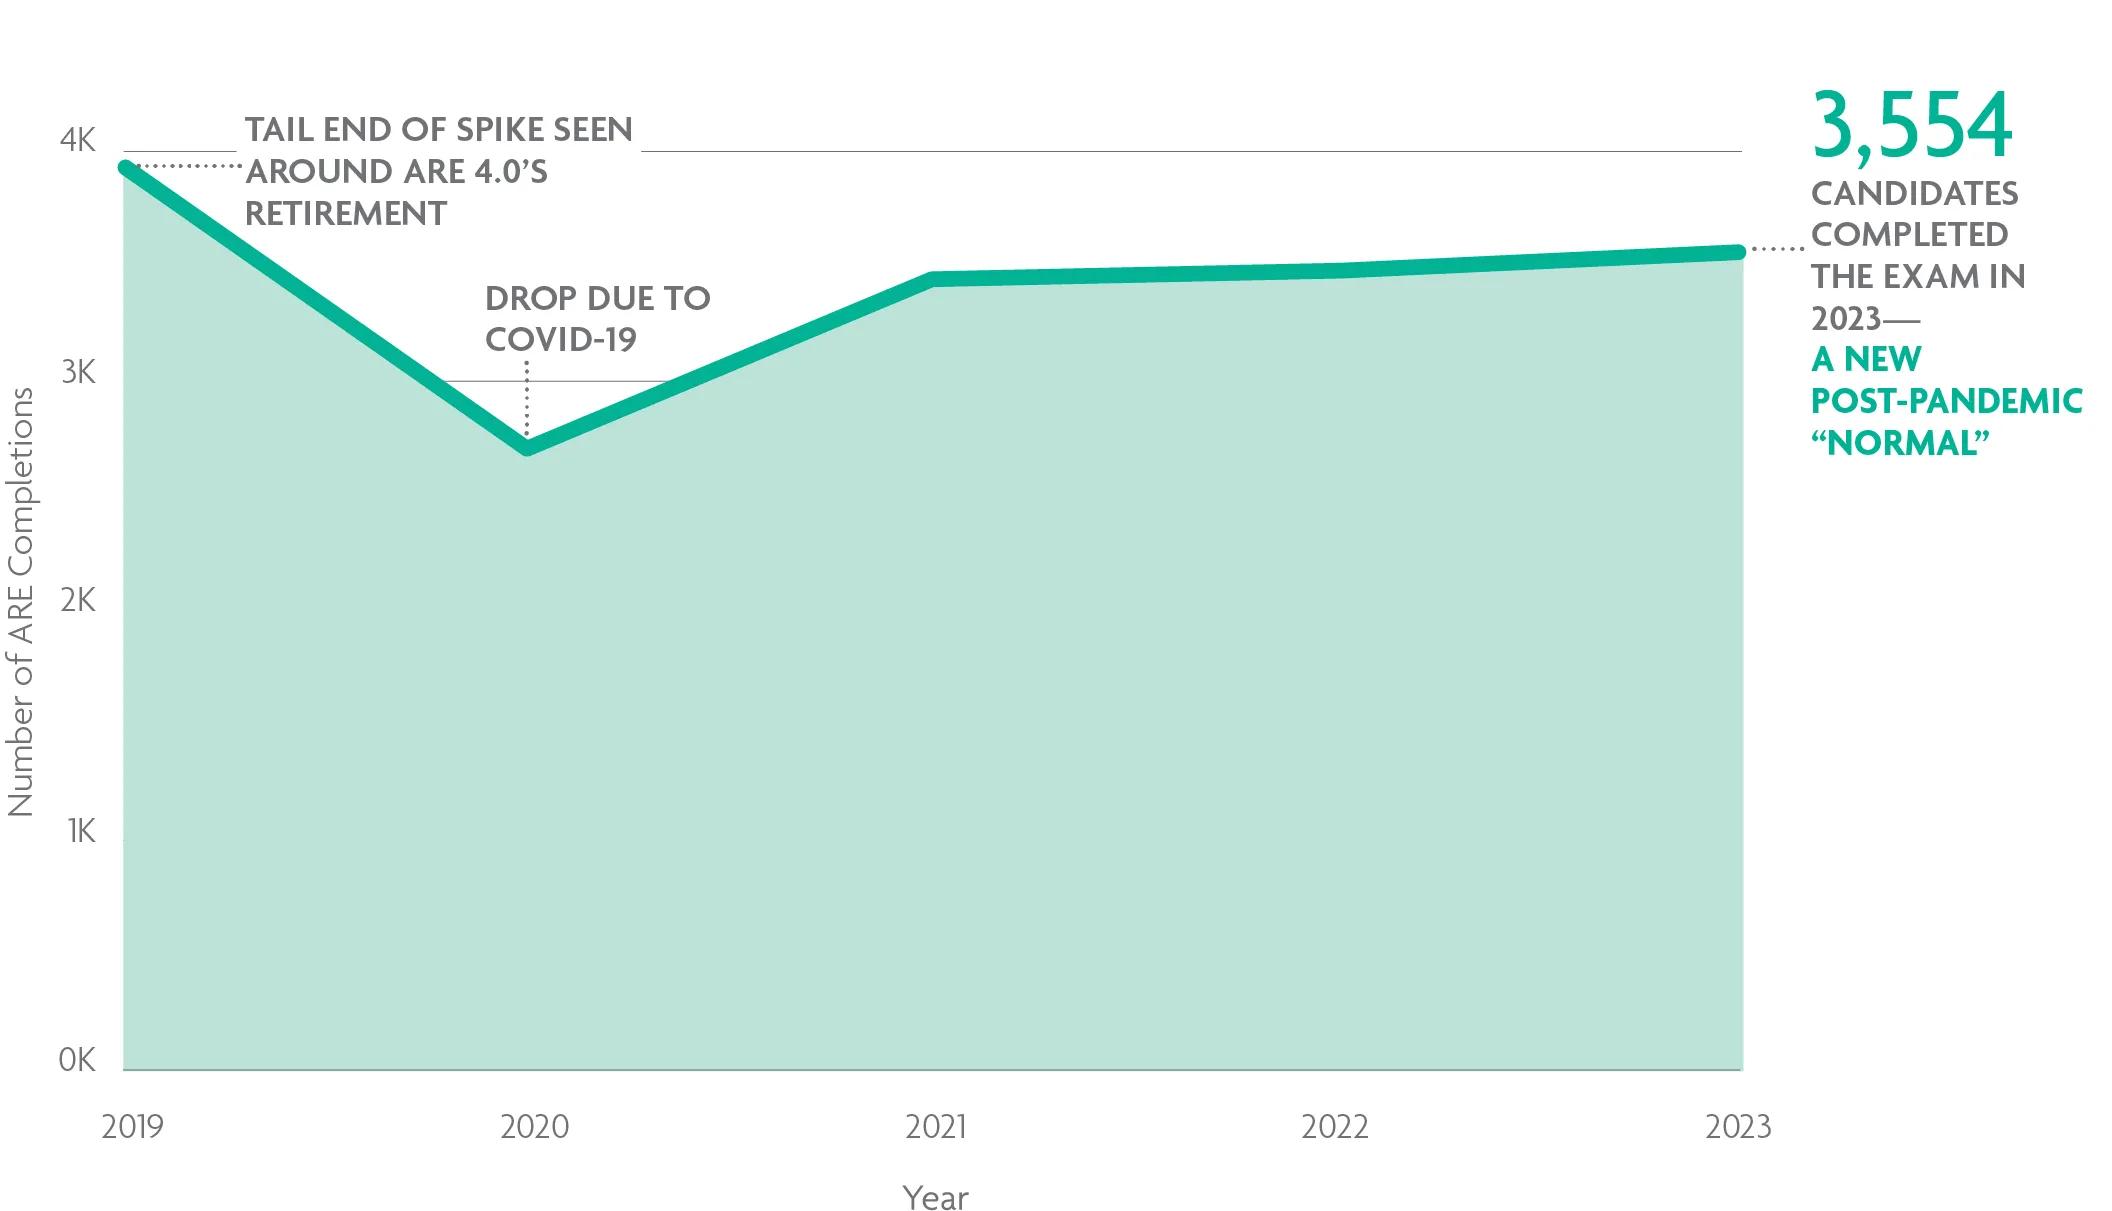 A line chart shows that more than 3,500 candidates completed the exam in 2023. For help with data accessibility, contact communications@ncarb.org. 